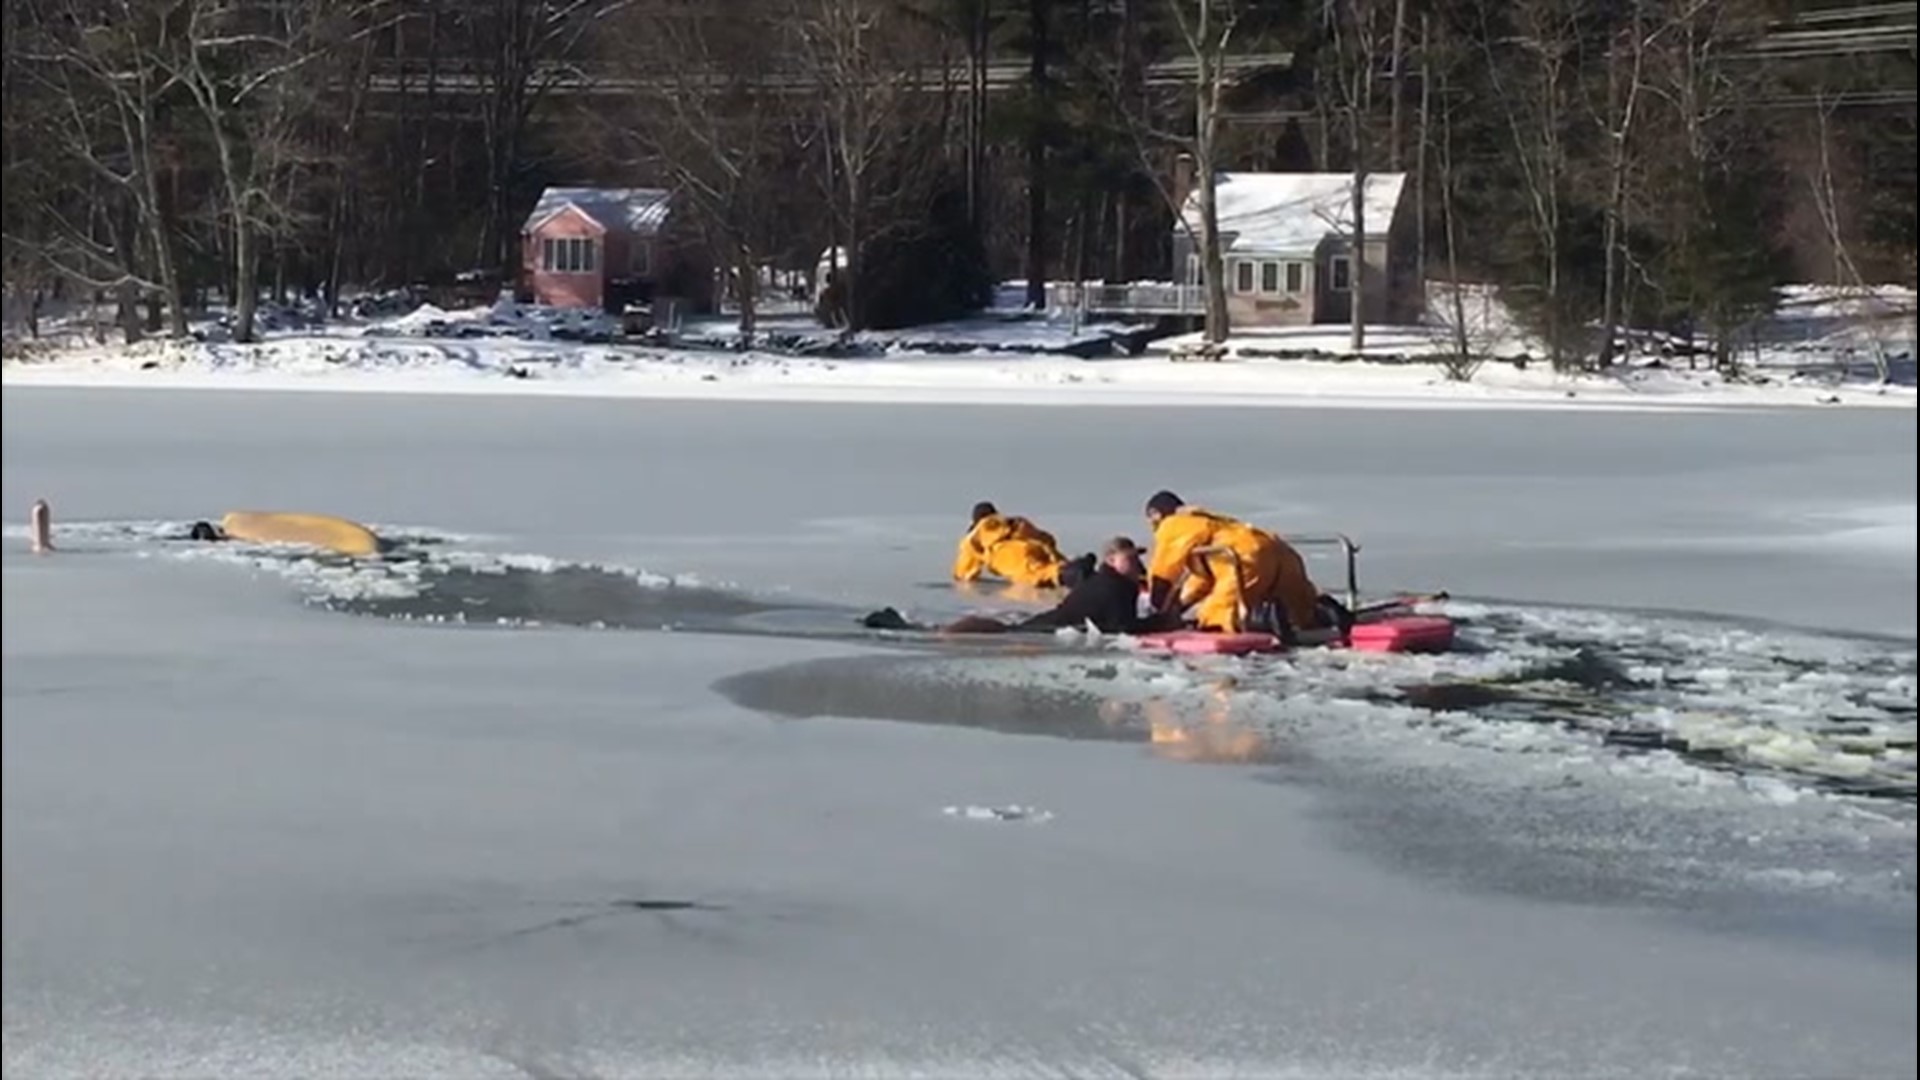 Firefighters were called to a frozen pond in Sterling, Massachusetts, to rescue a man and his dog that had fallen into the ice on Jan. 19.